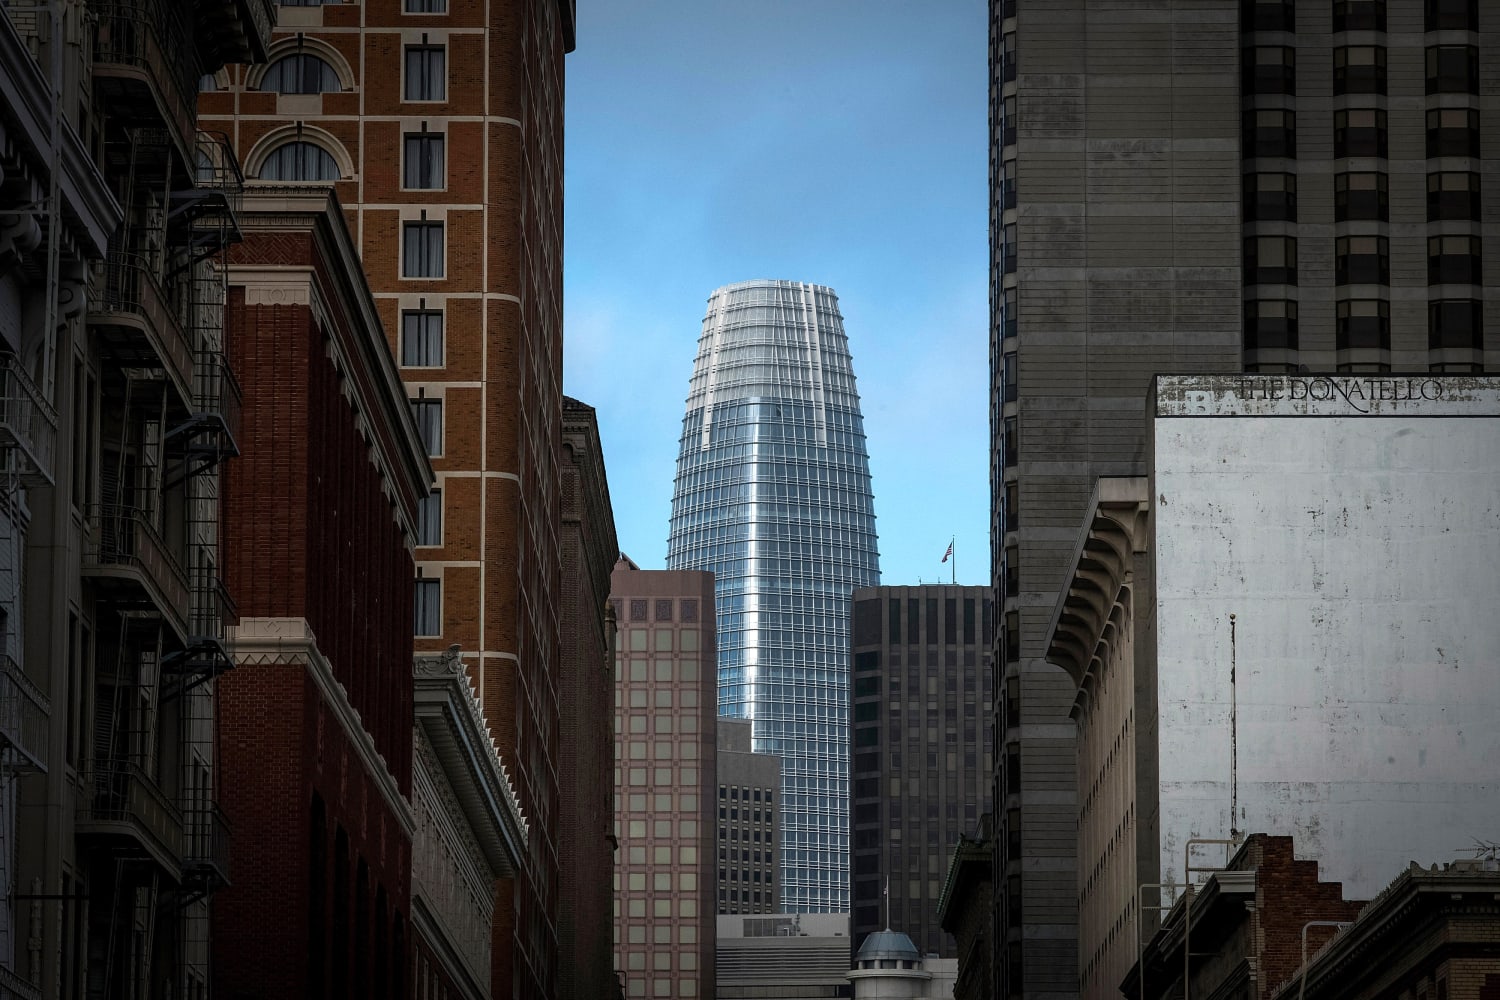 'San Francisco is full': Tech backlash reaches new heights with skyscraper battle